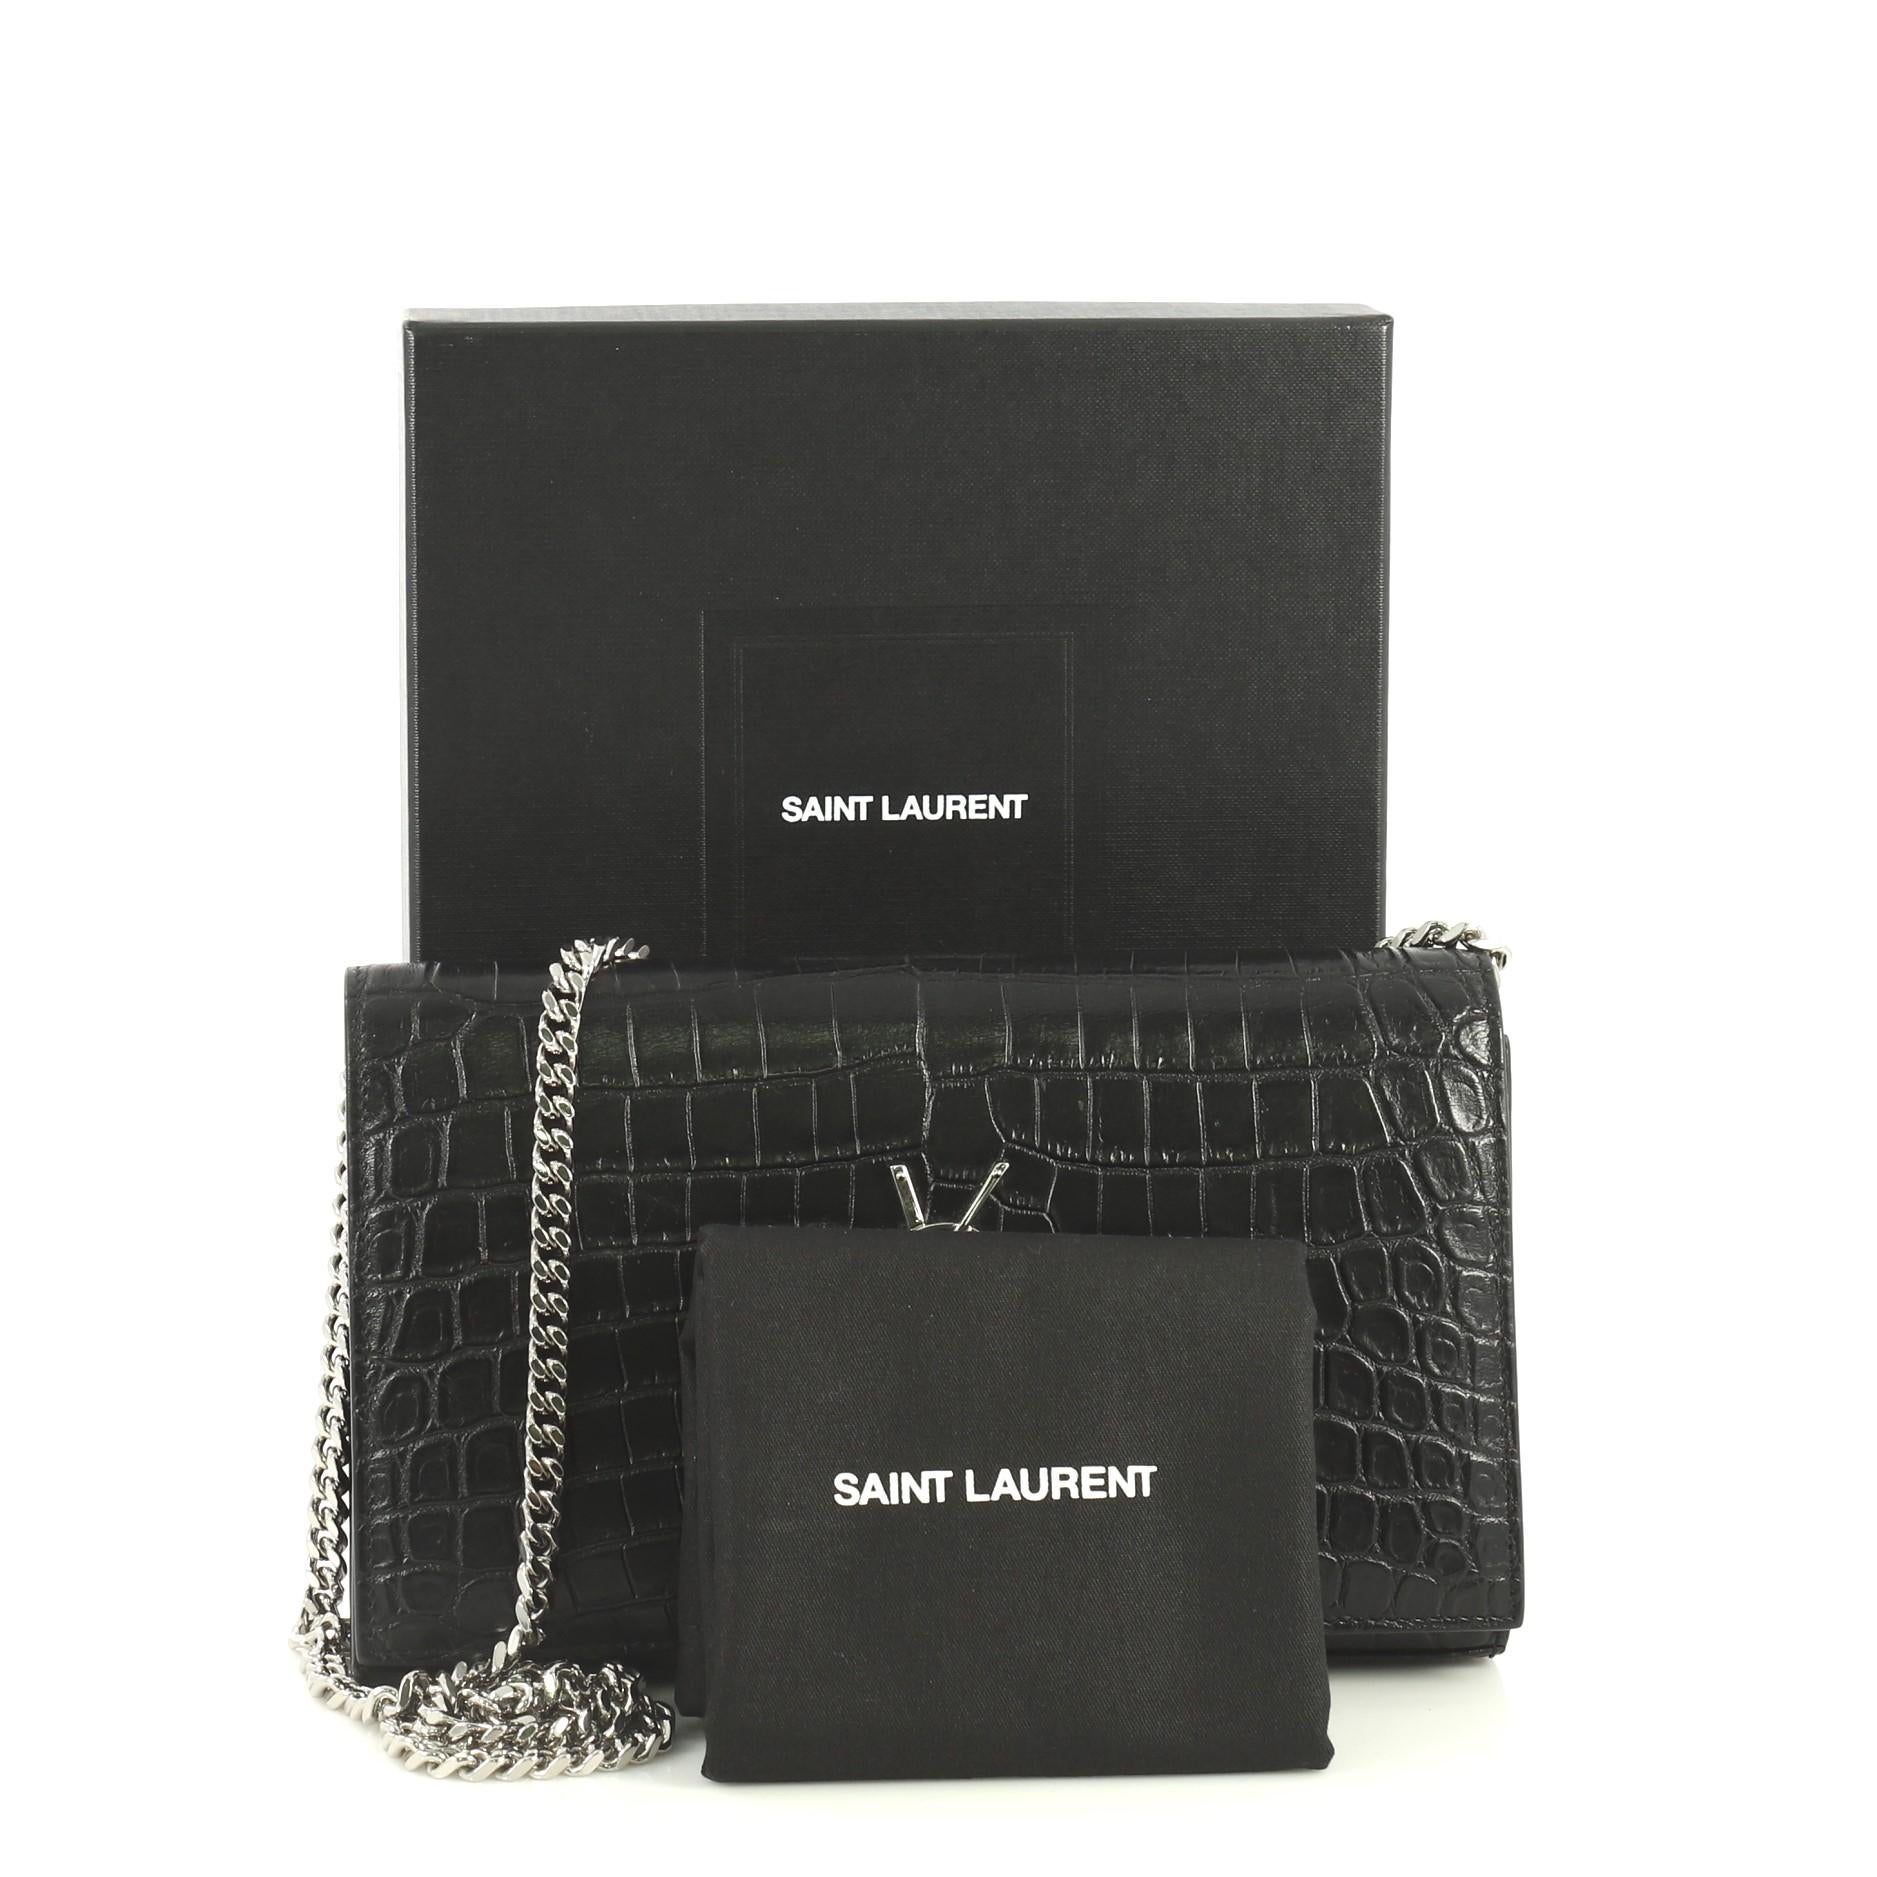 This Saint Laurent Classic Monogram Wallet on Chain Crocodile Embossed Leather, crafted from black crocodile embossed leather, features chain link strap, YSL monogram logo at the front, and silver-tone hardware. Its magnetic snap closure opens to a